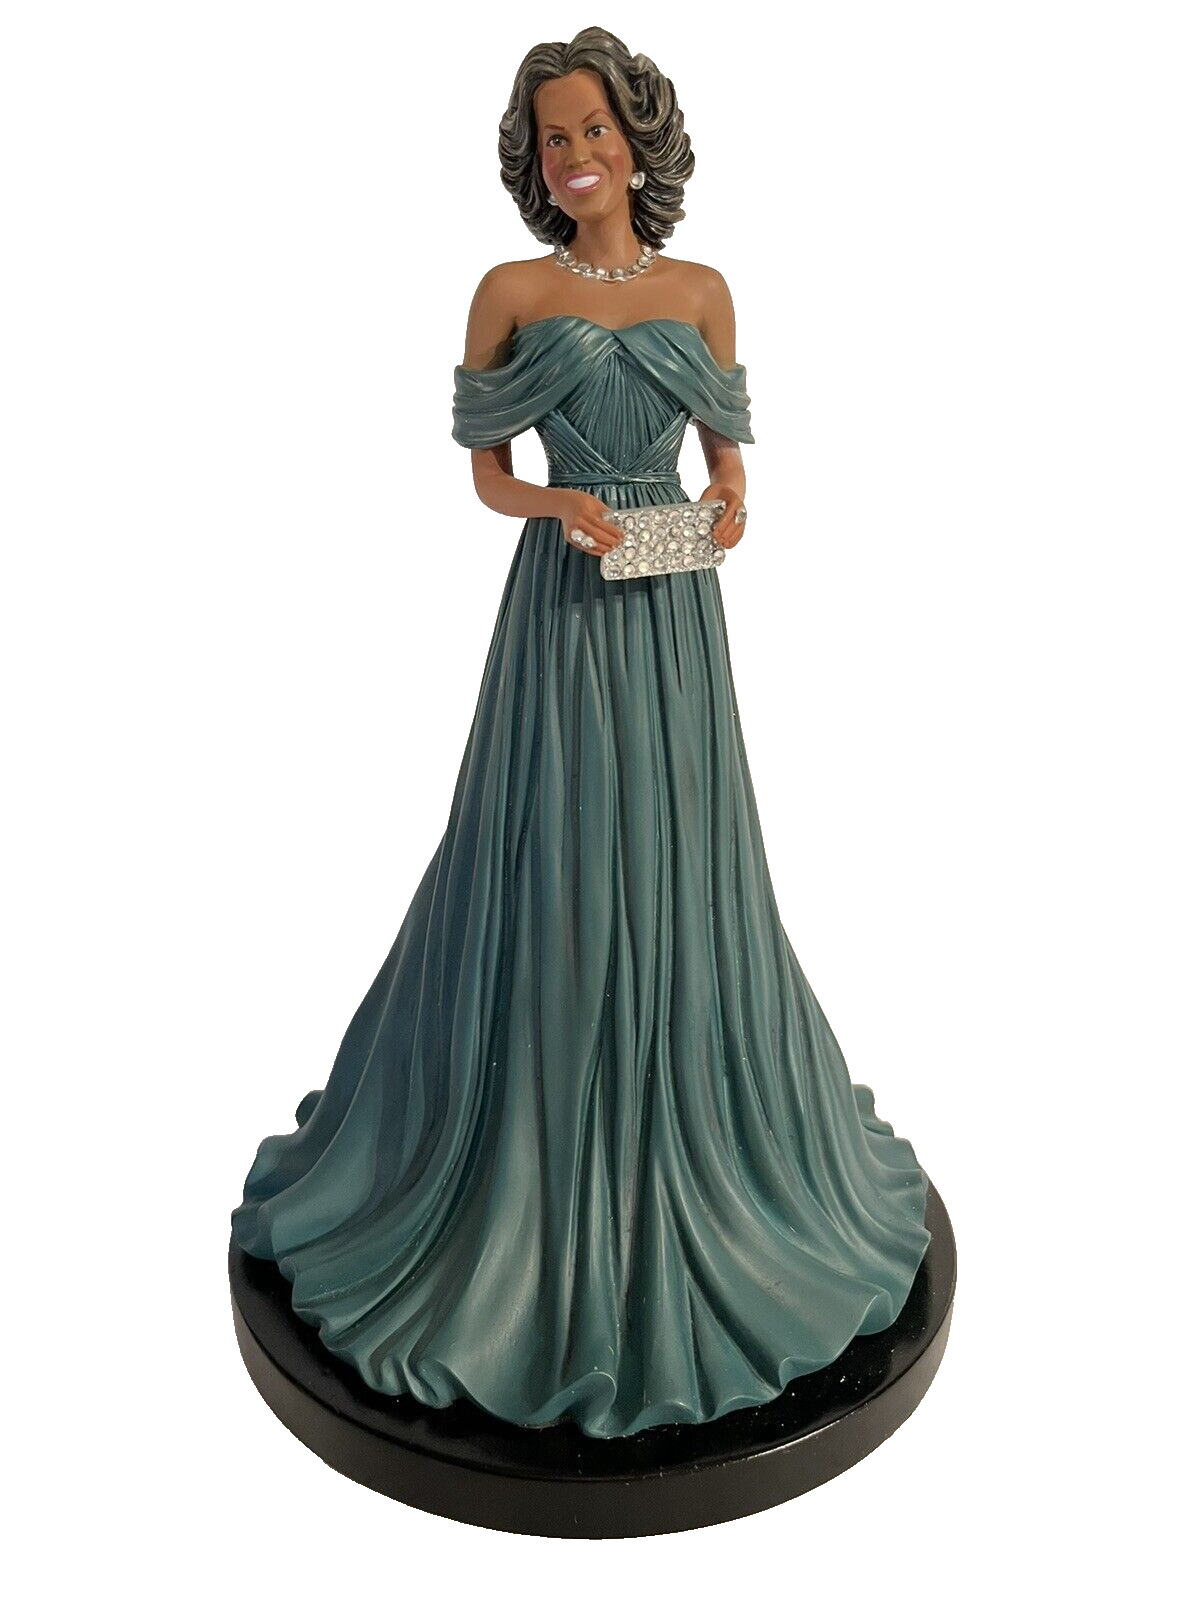 Michelle Obama Reflection of Style and Grace The Hamilton Collection Figurine 